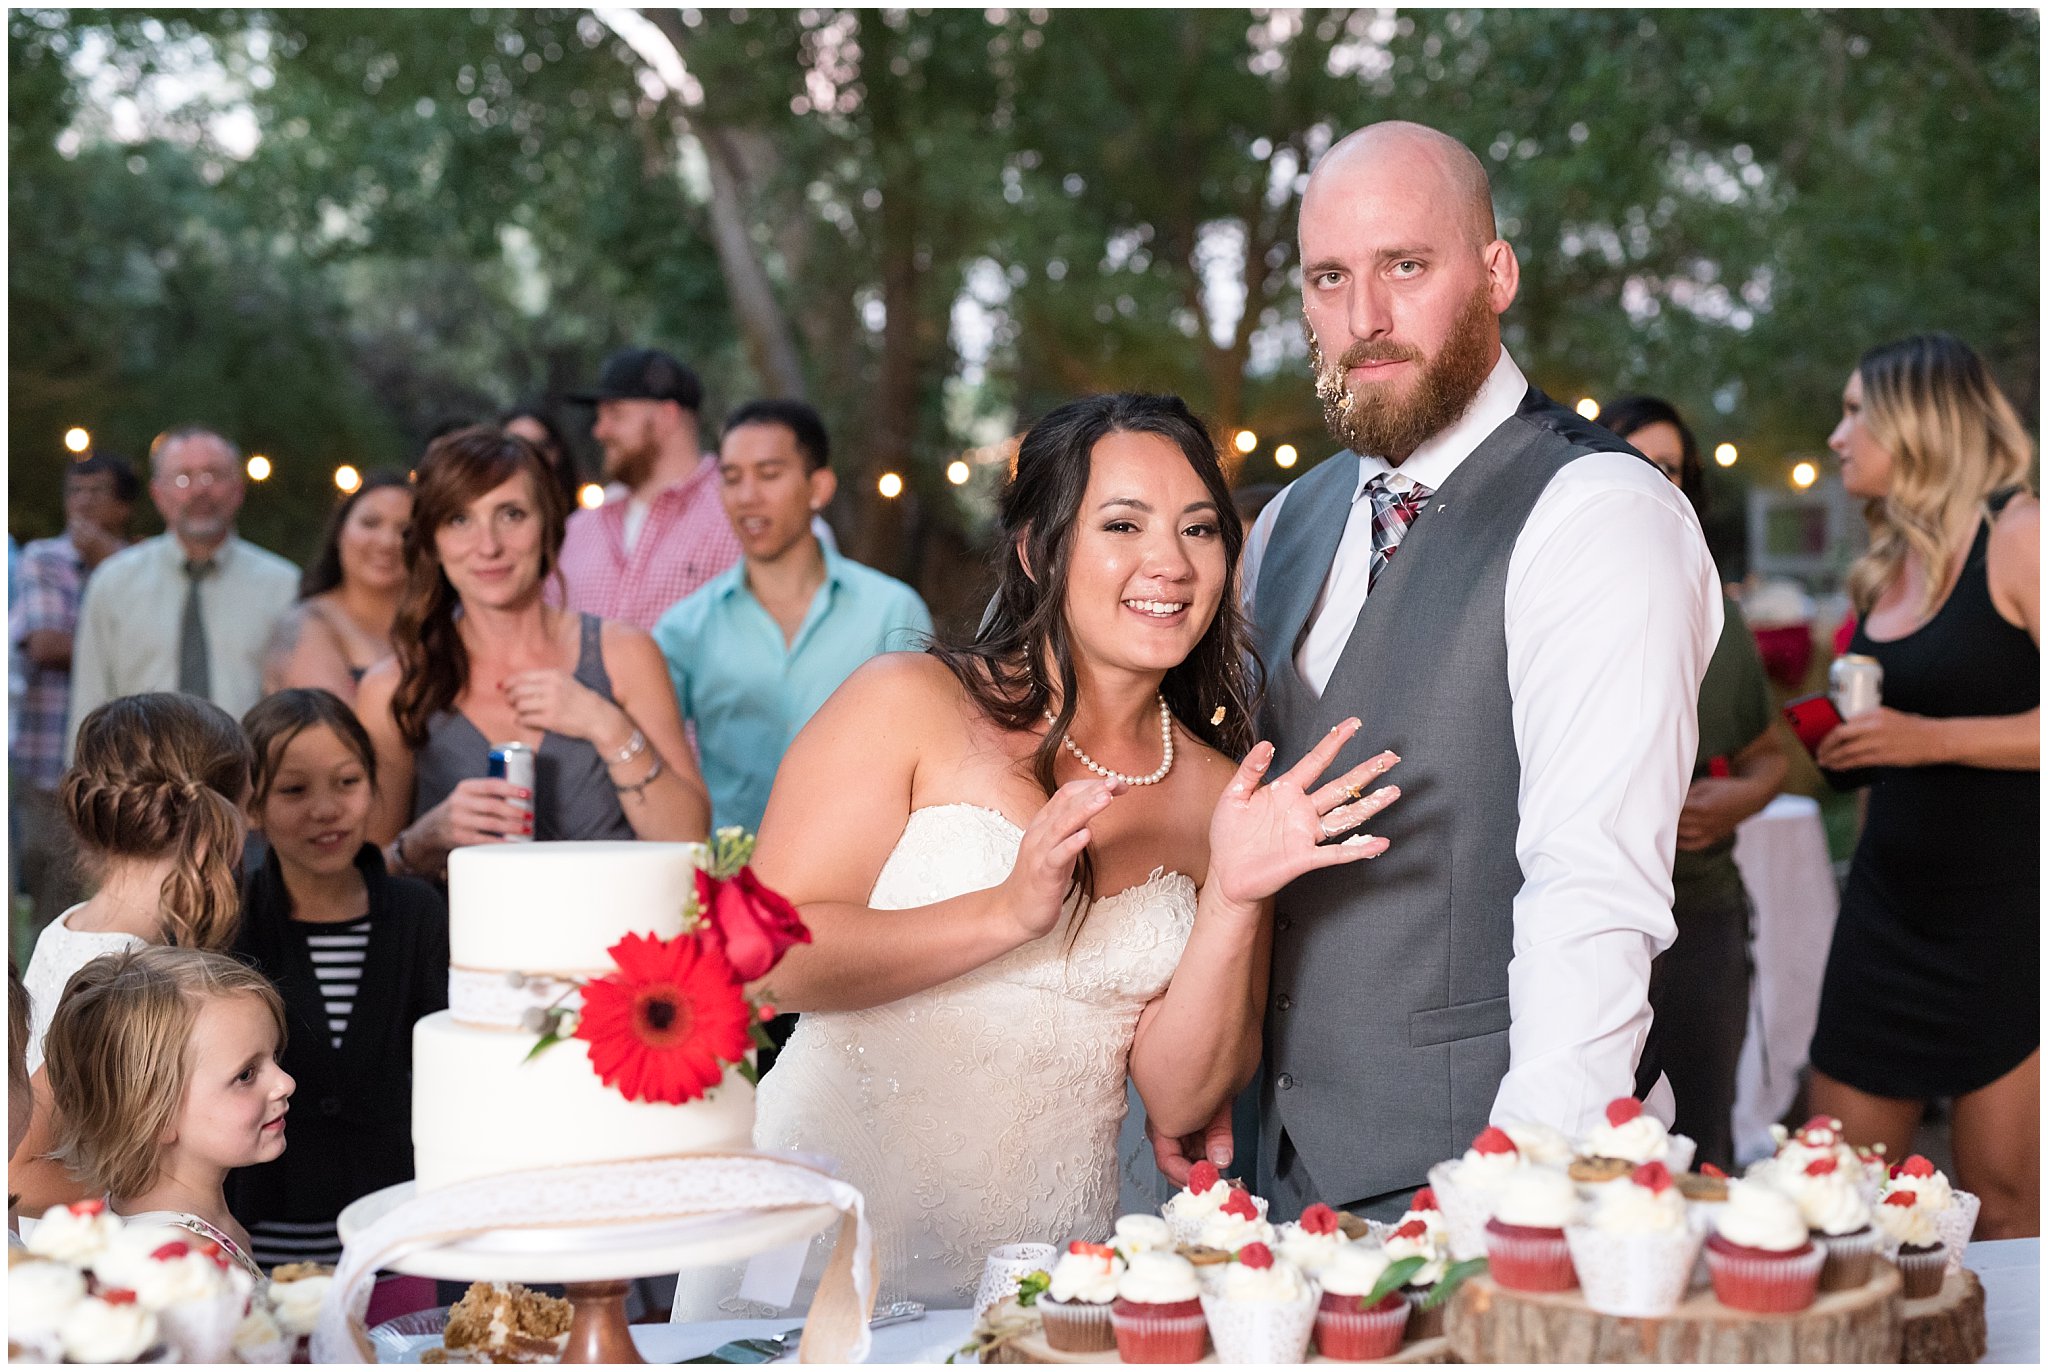 Bride and groom covered in cake during cake cutting | Red and Grey wedding | Davis County Outdoor Wedding | Jessie and Dallin Photography